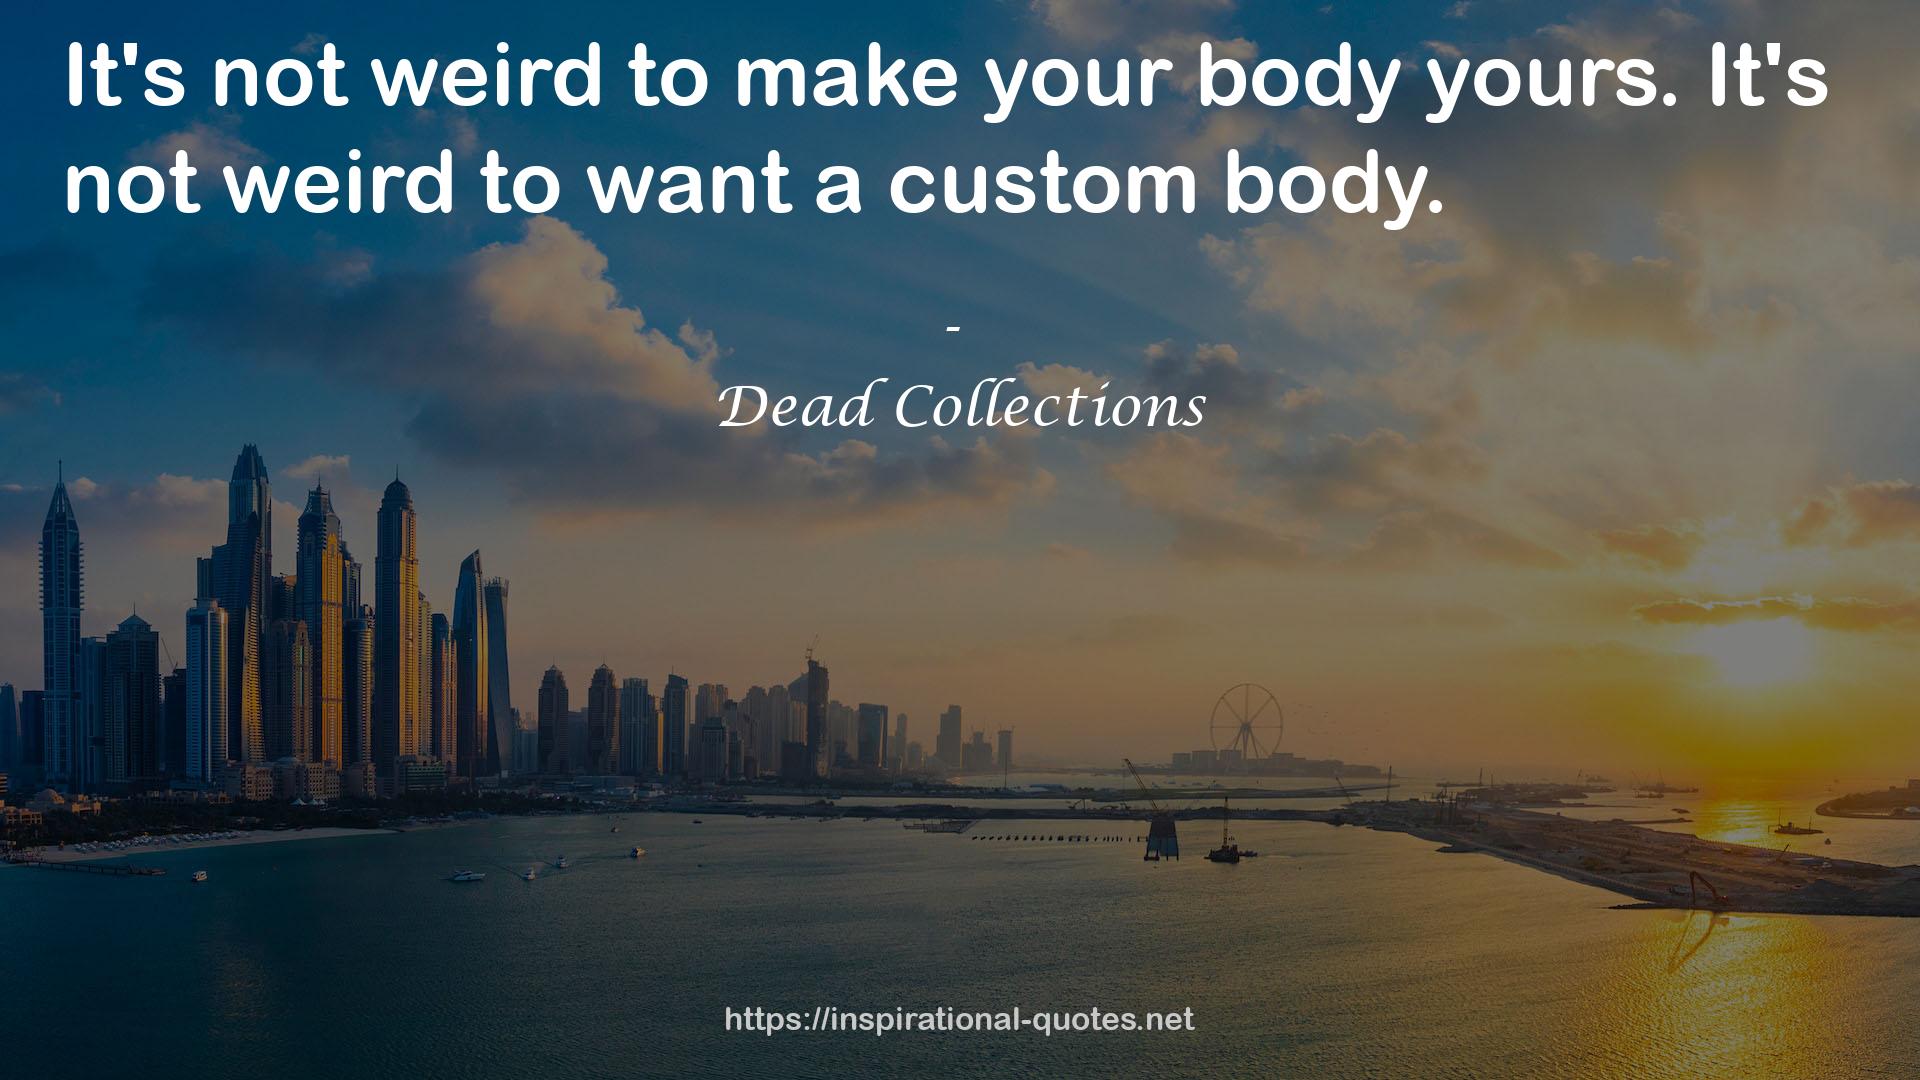 Dead Collections QUOTES